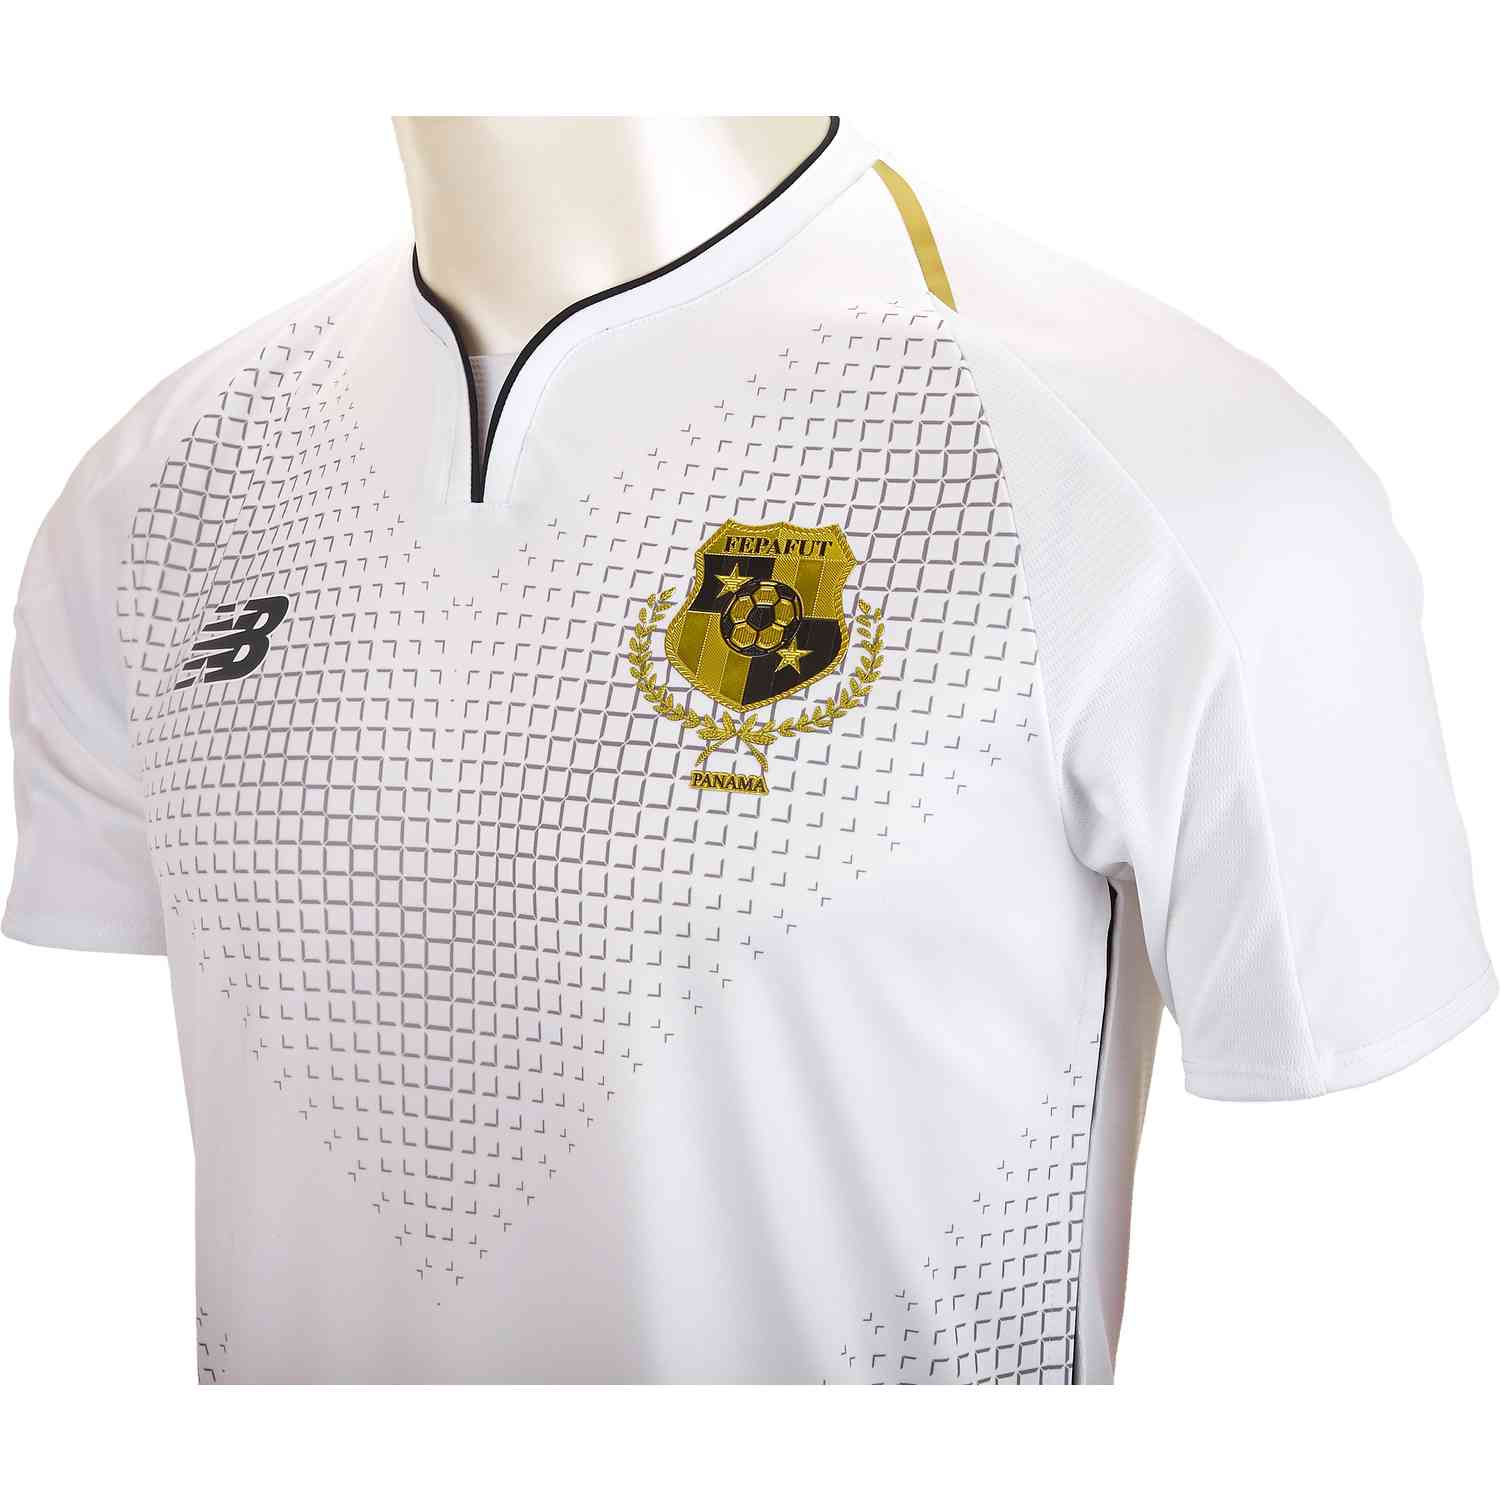 gold cup 2019 jersey